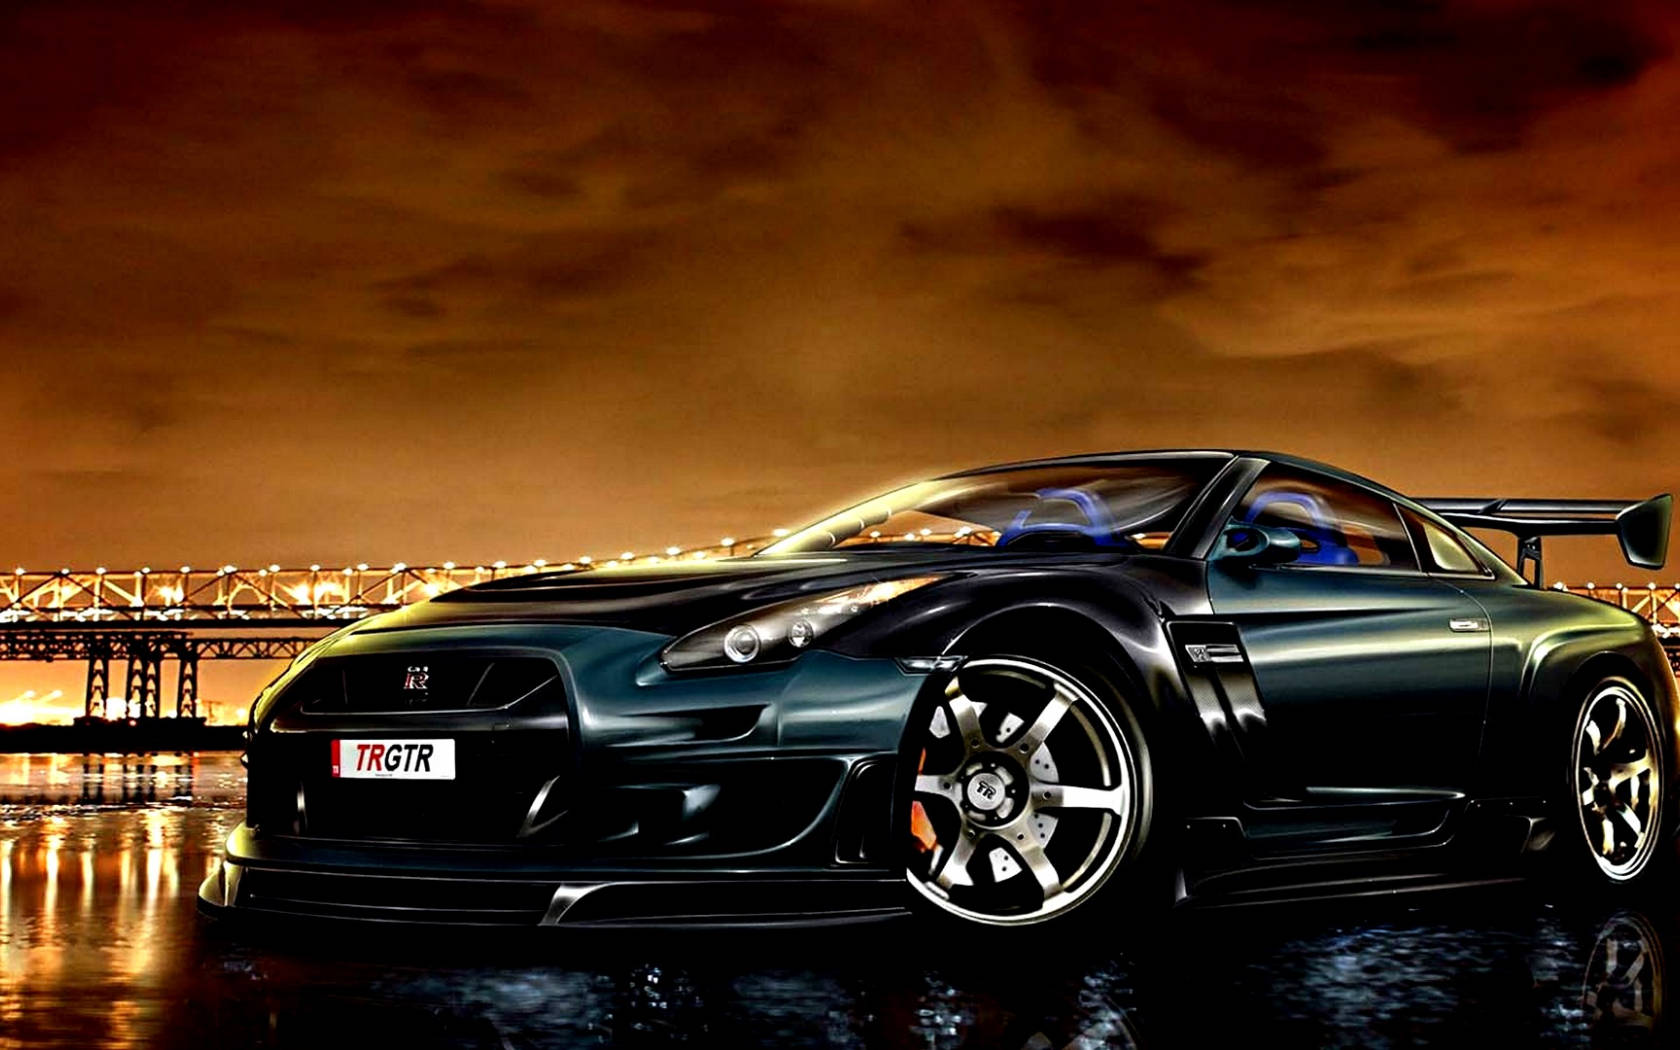 Stunning Night View Of Nissan Gt-r - An Epitome Of Cool Sports Car Wallpaper